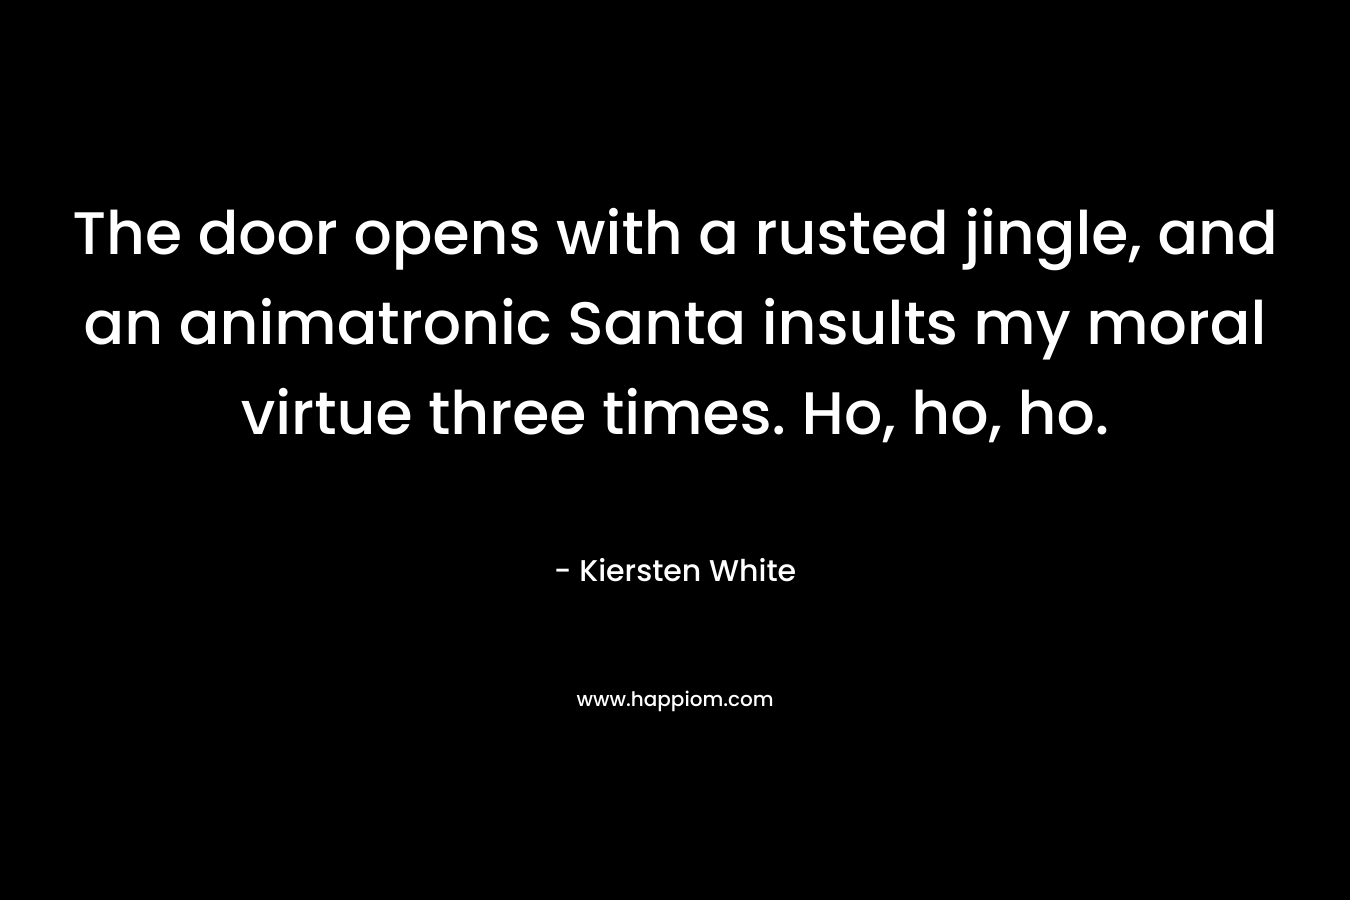 The door opens with a rusted jingle, and an animatronic Santa insults my moral virtue three times. Ho, ho, ho. – Kiersten White